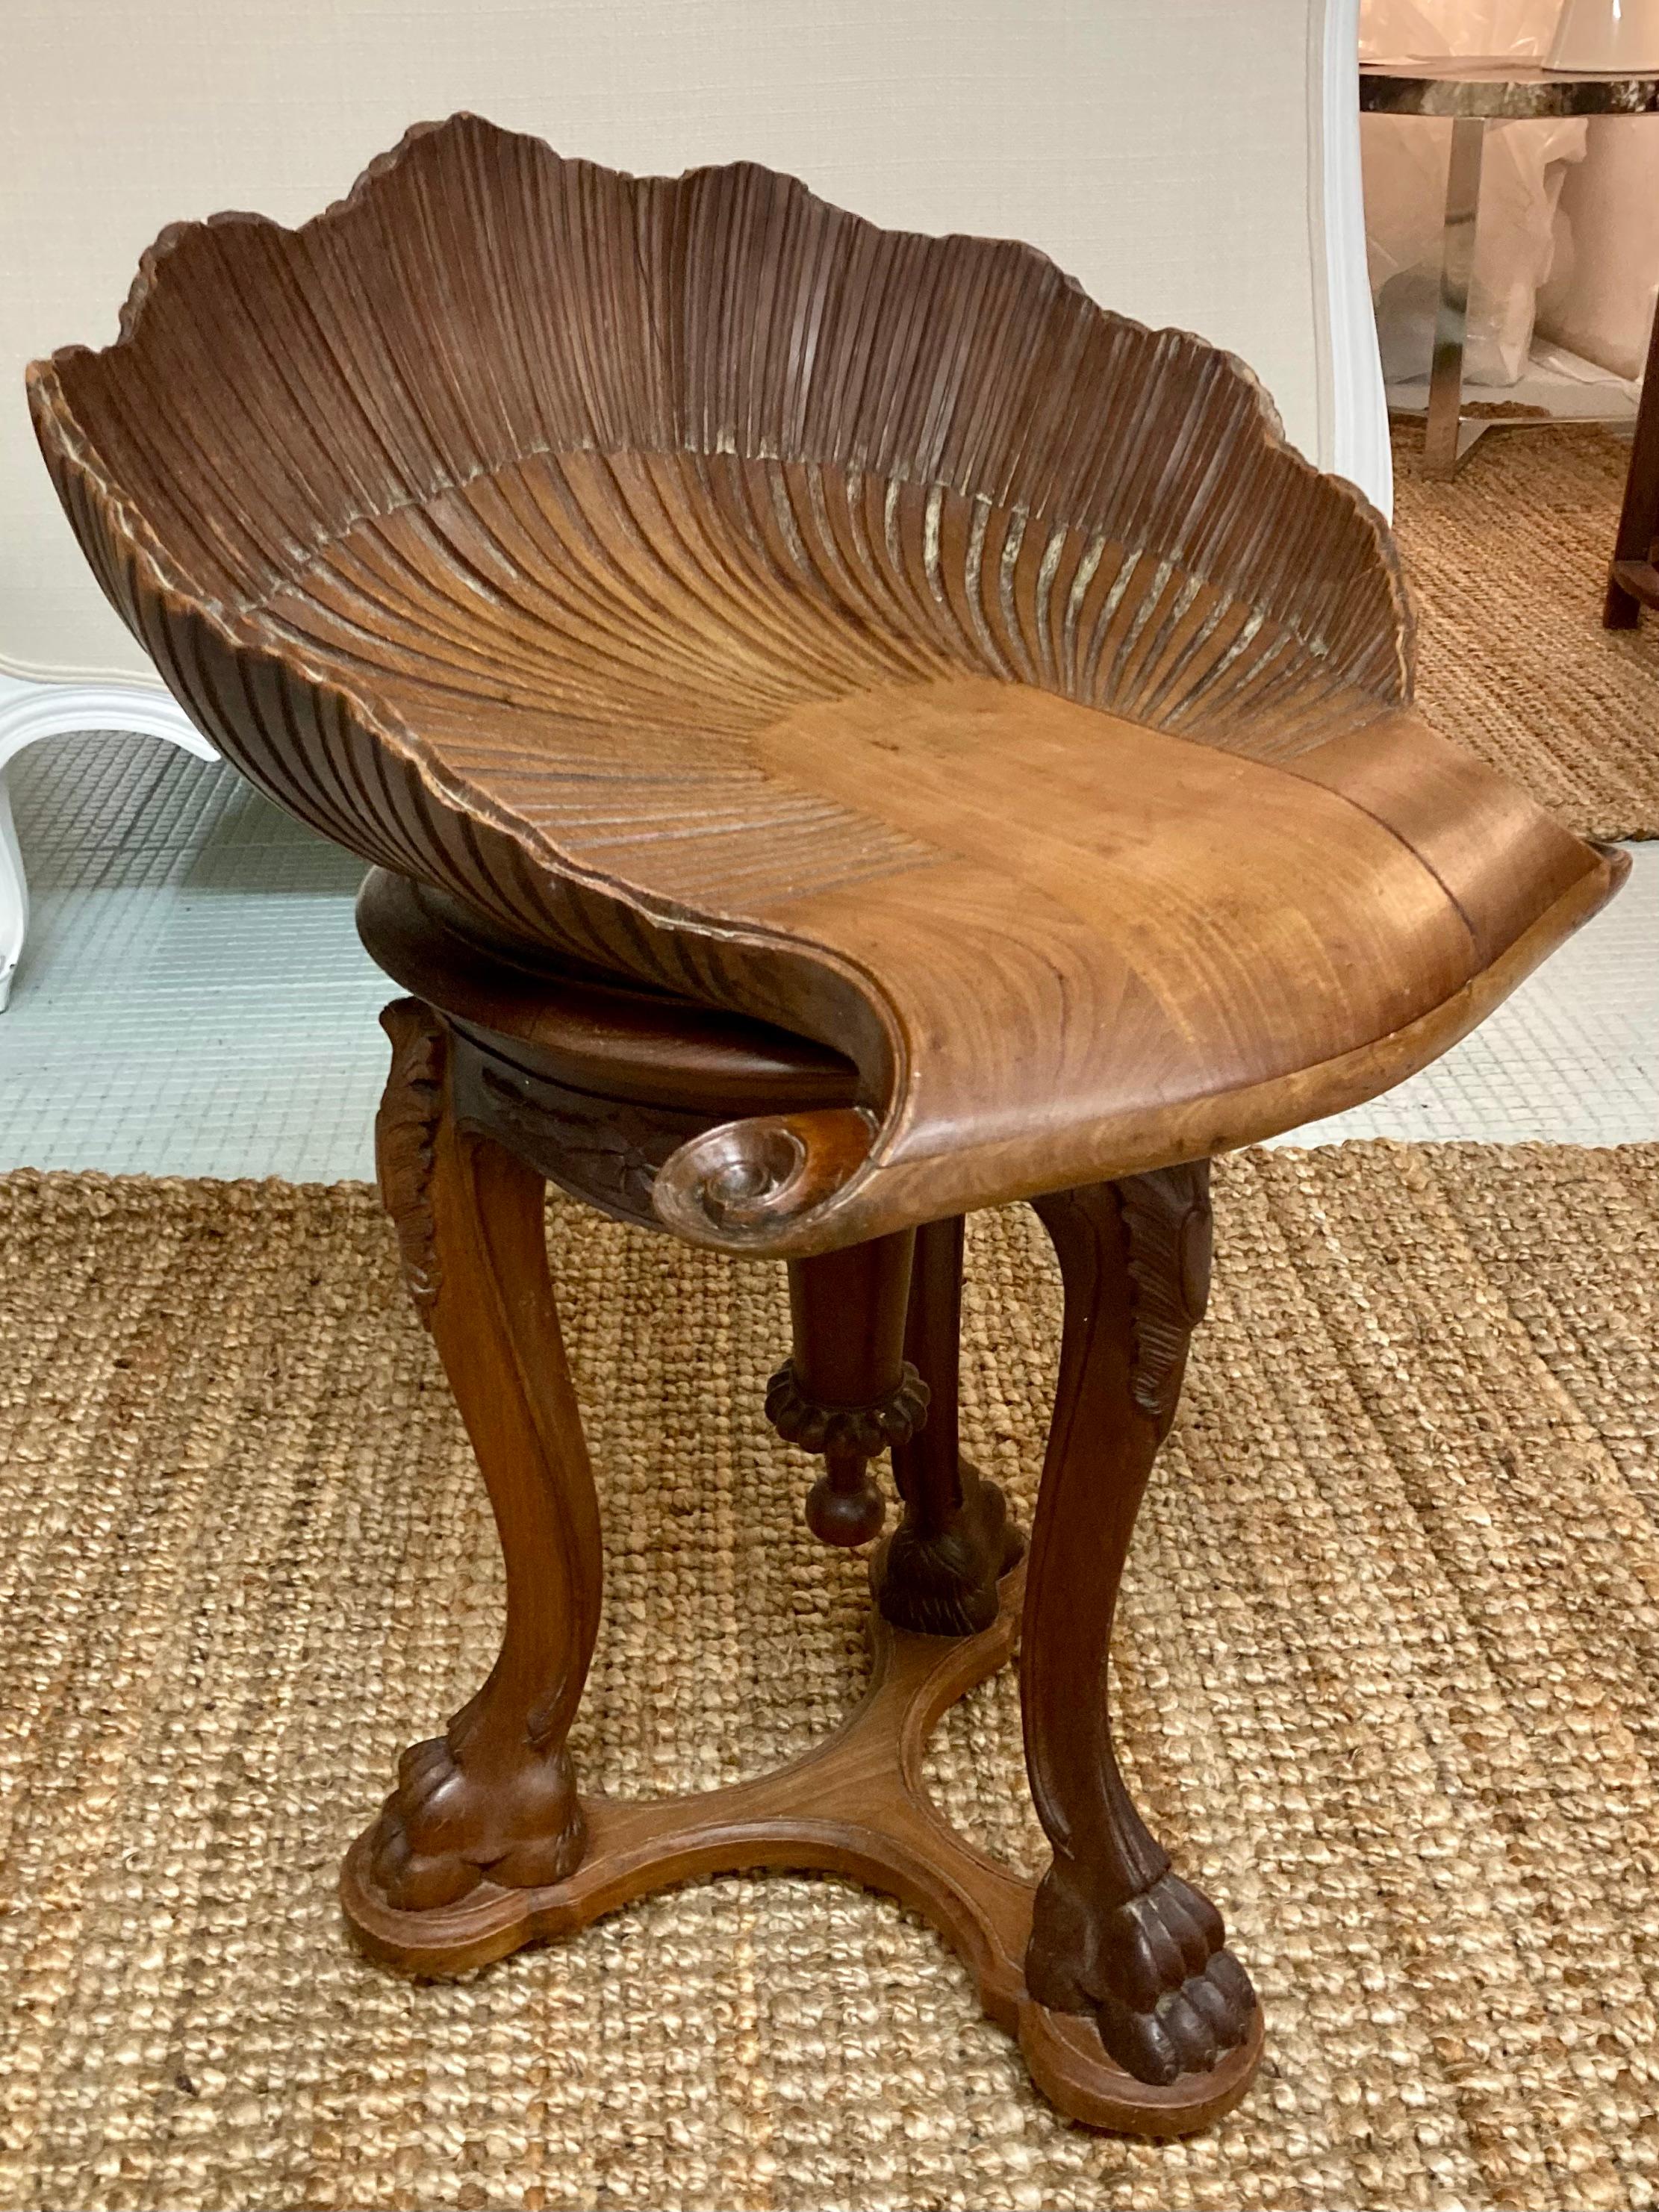 Beautiful 19th Century Venetian grotto swivel bench. Amazing carving details and gorgeous original stained wood finish. Add some Italian style to your home.